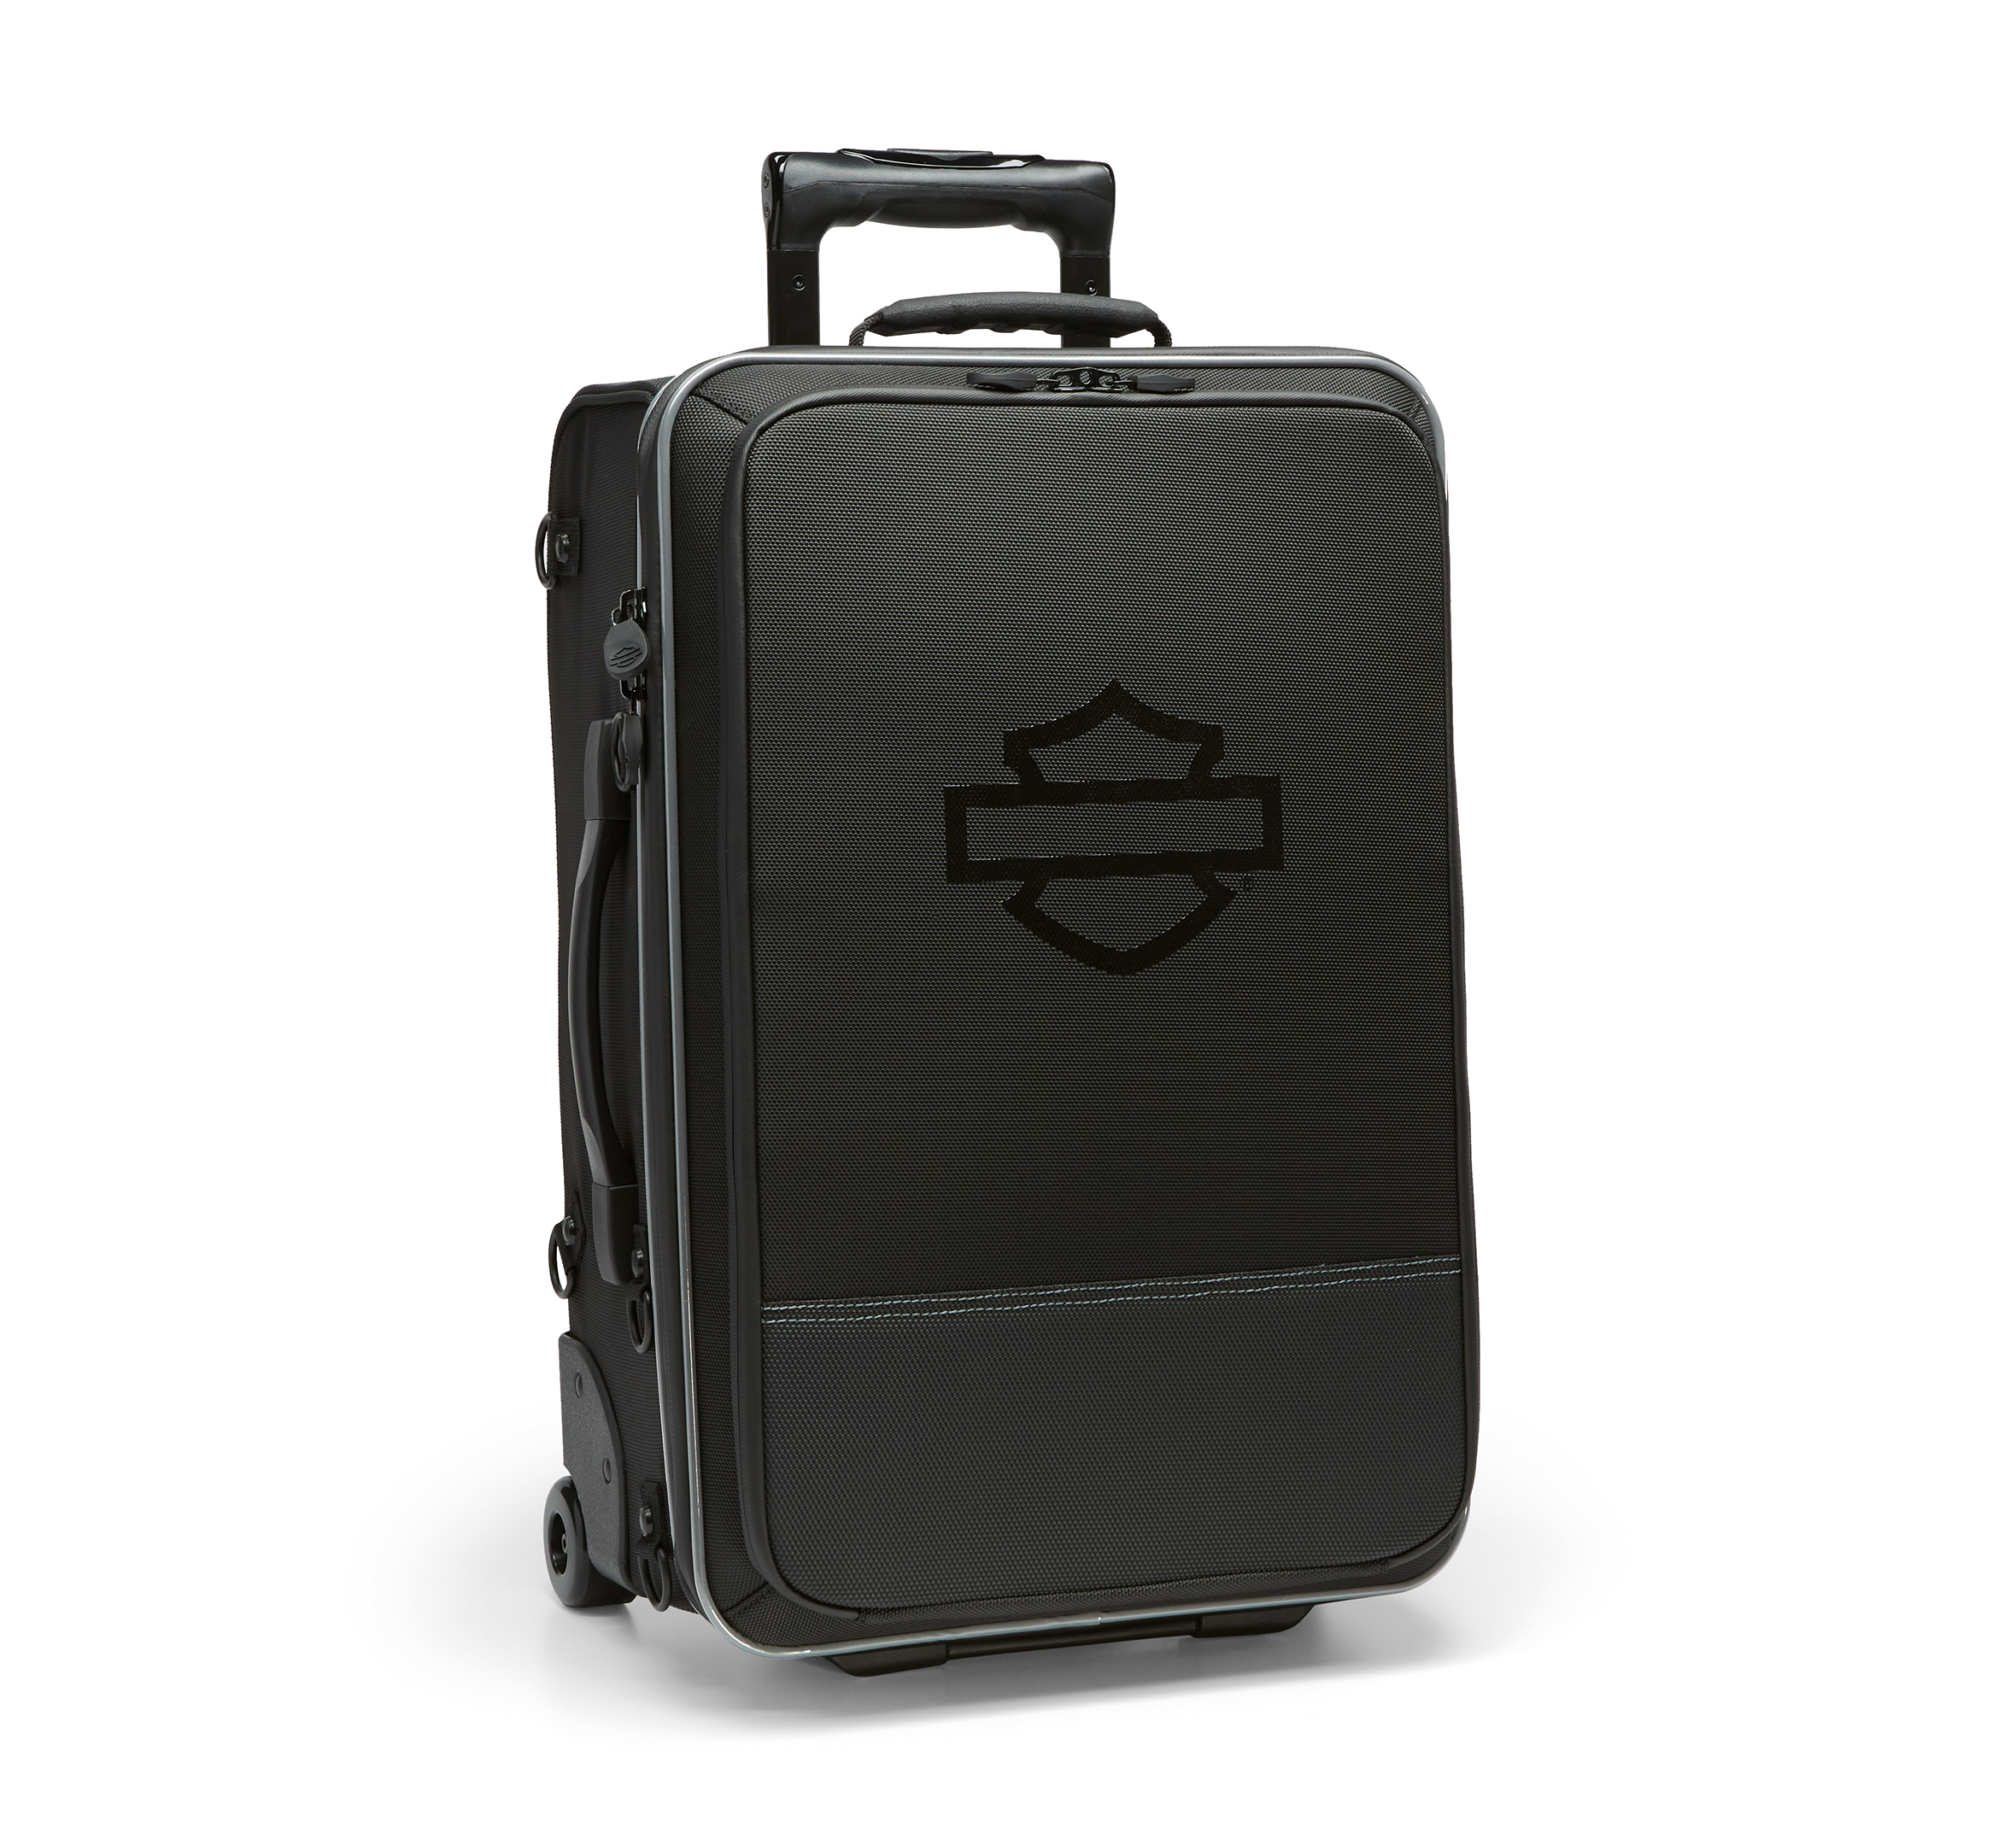 Cred Small Travel Bag Price in India, Full Specifications & Offers